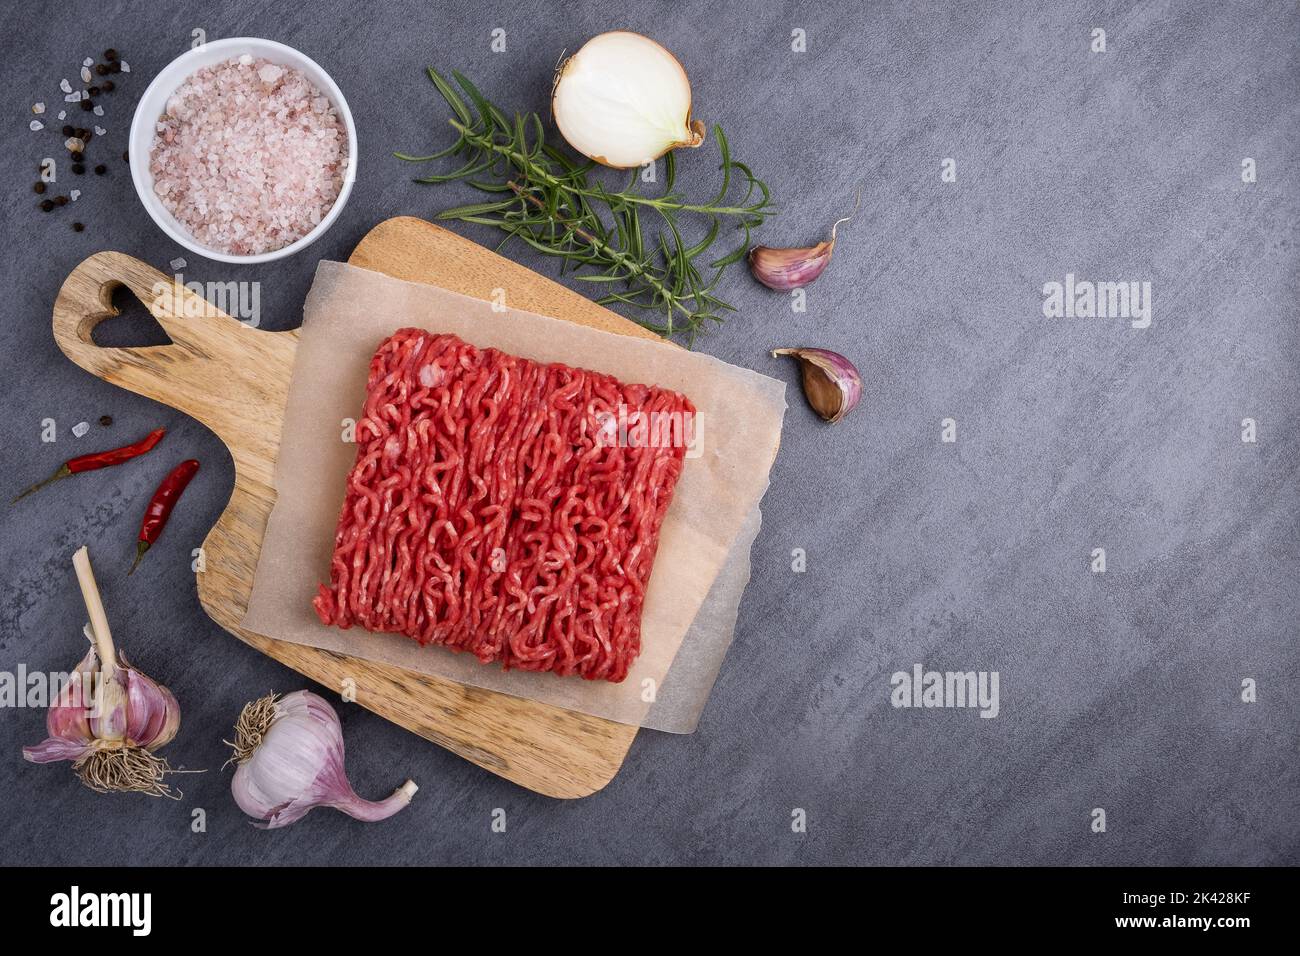 Minced meat lies on a cutting board surrounded by cooking ingredients. Stock Photo